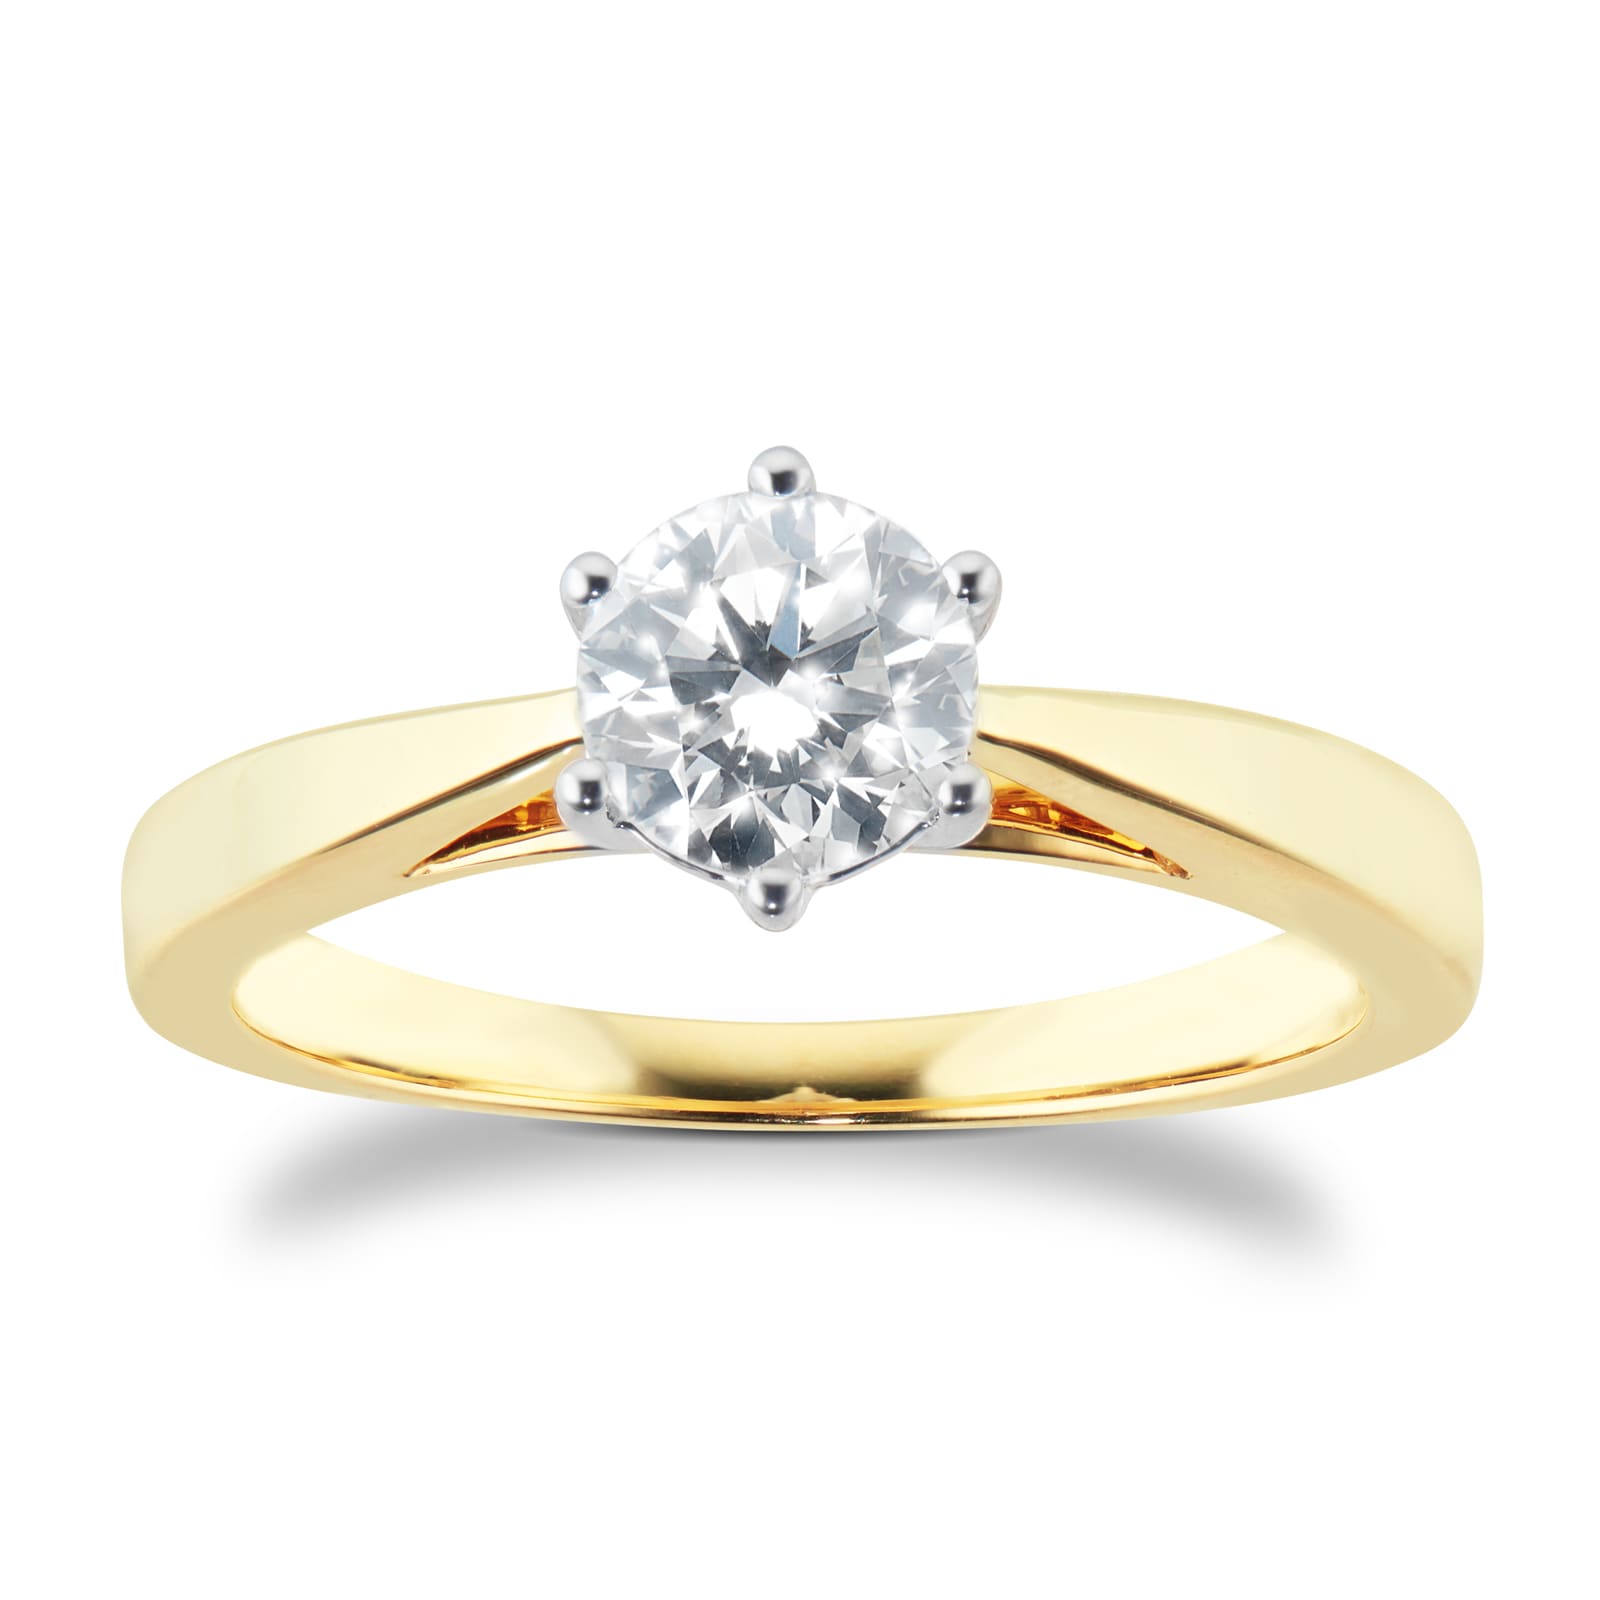 18ct Yellow Gold 0.70ct 6 Claw Solitaire Diamond Ring - Ring Size N